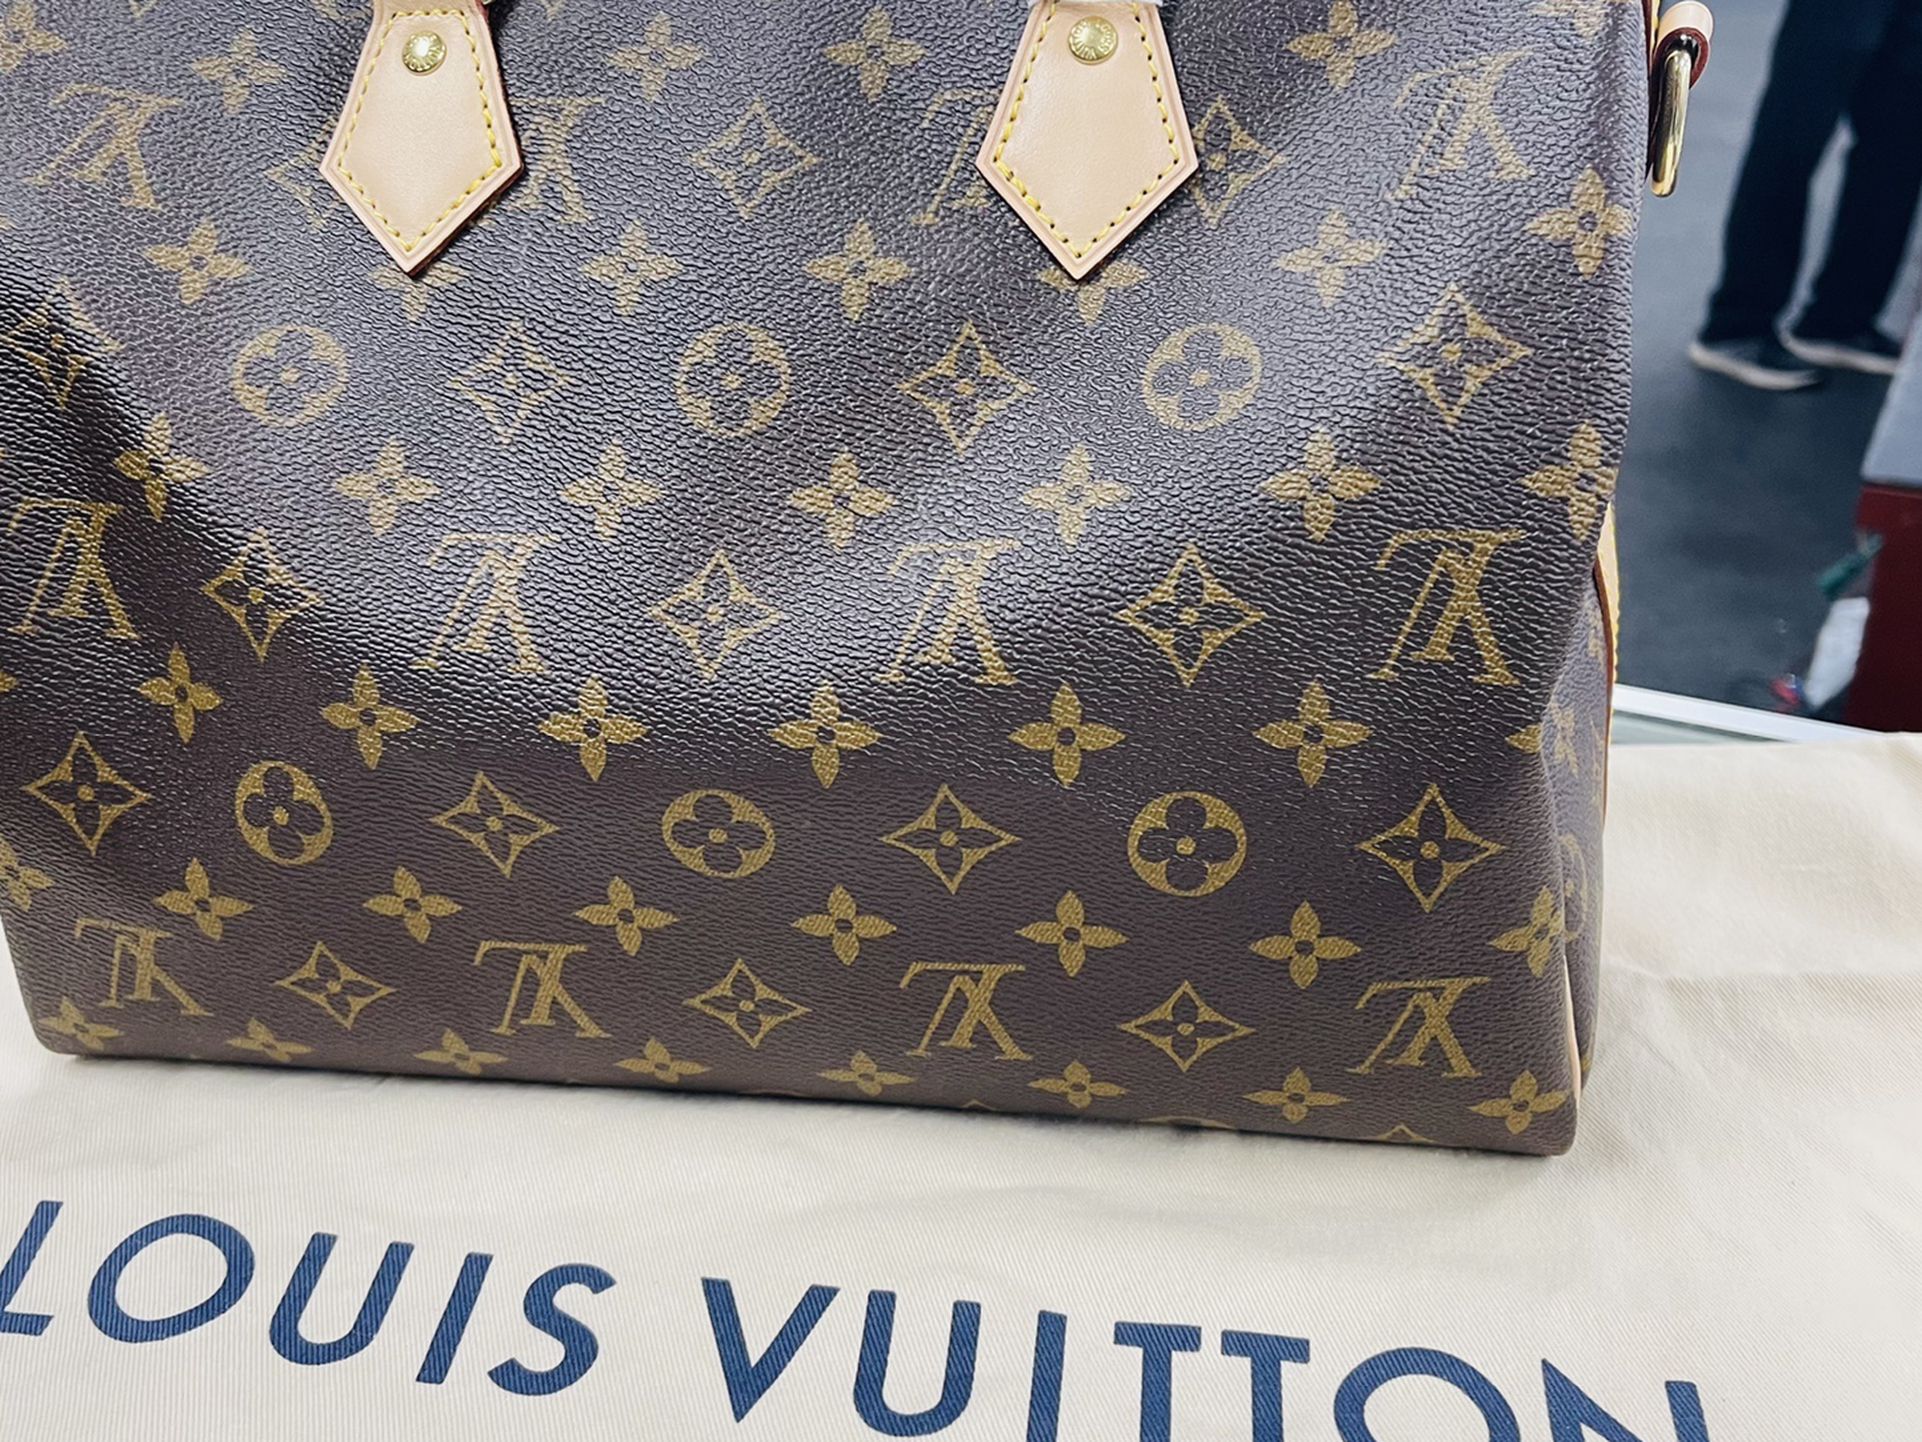 Louis Vuitton Monogram Sandals for Sale in Charlotte, NC - OfferUp